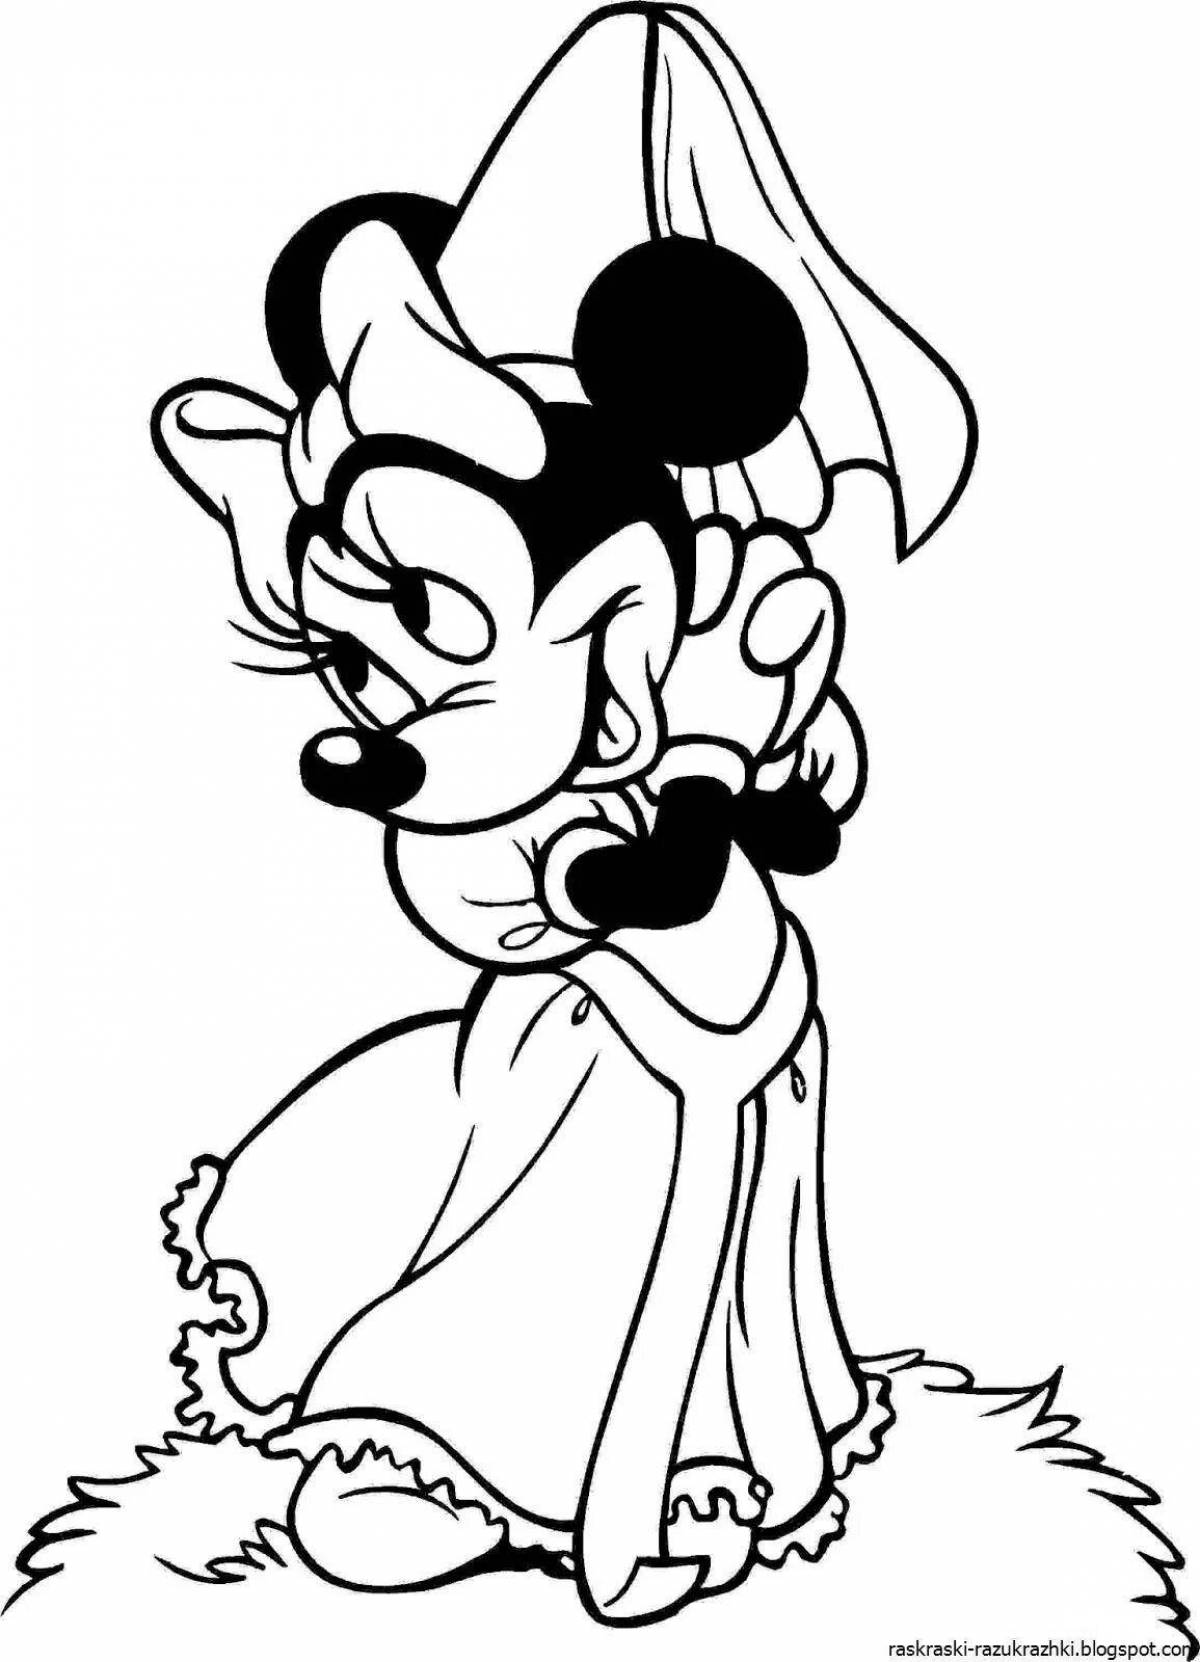 Coloring book shining minnie mouse